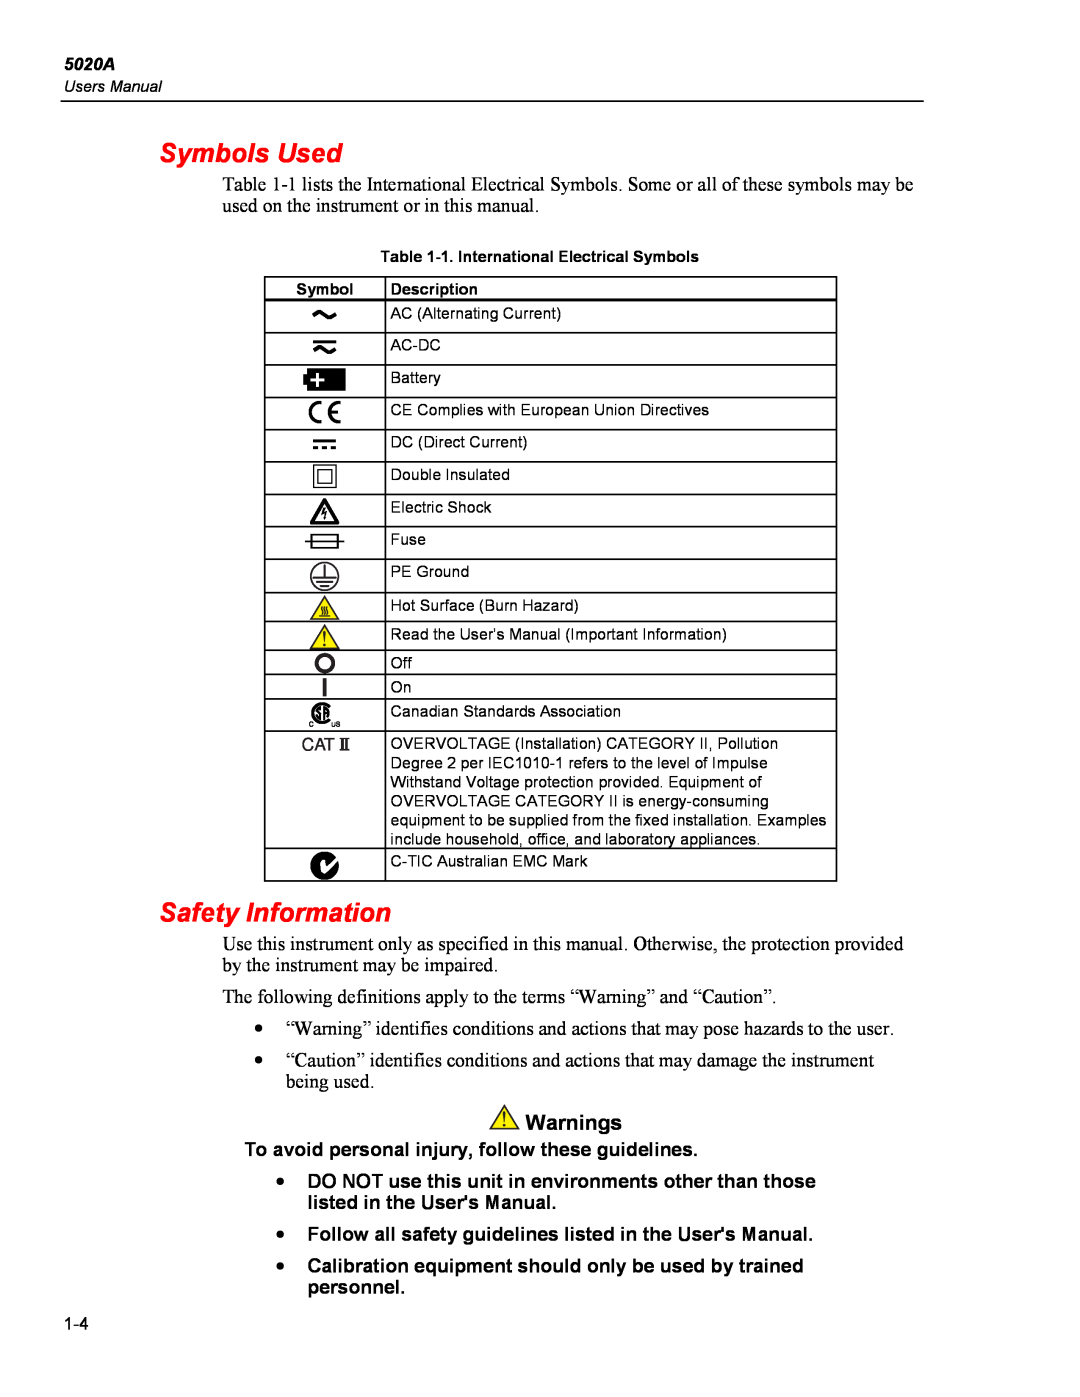 Fluke 5020A user manual Symbols Used, Safety Information, Warnings, To avoid personal injury, follow these guidelines 